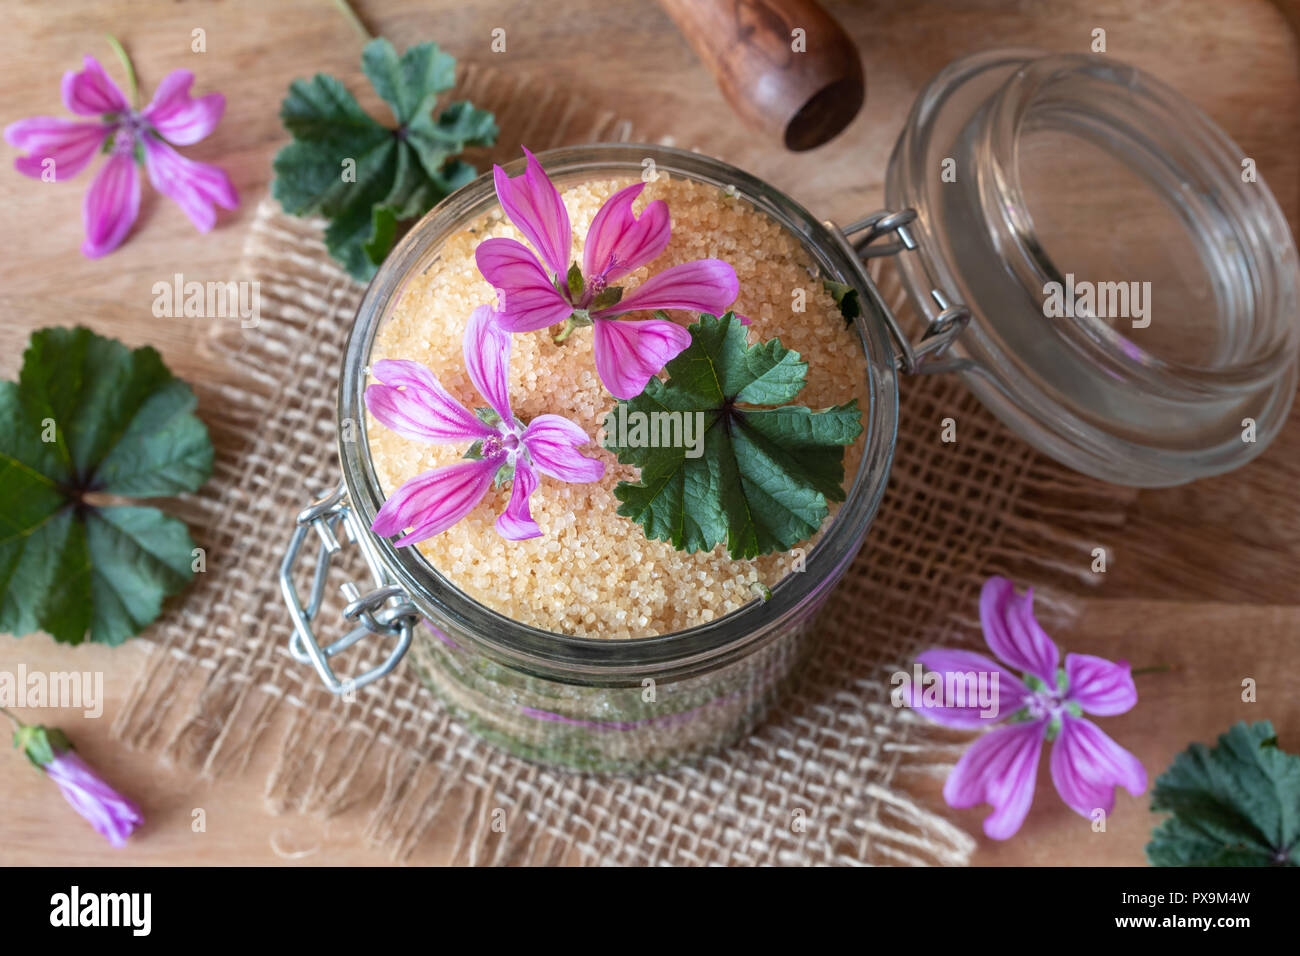 Preparation of herbal syrup against cough from wild common mallow flowers, leaves and cane sugar Stock Photo